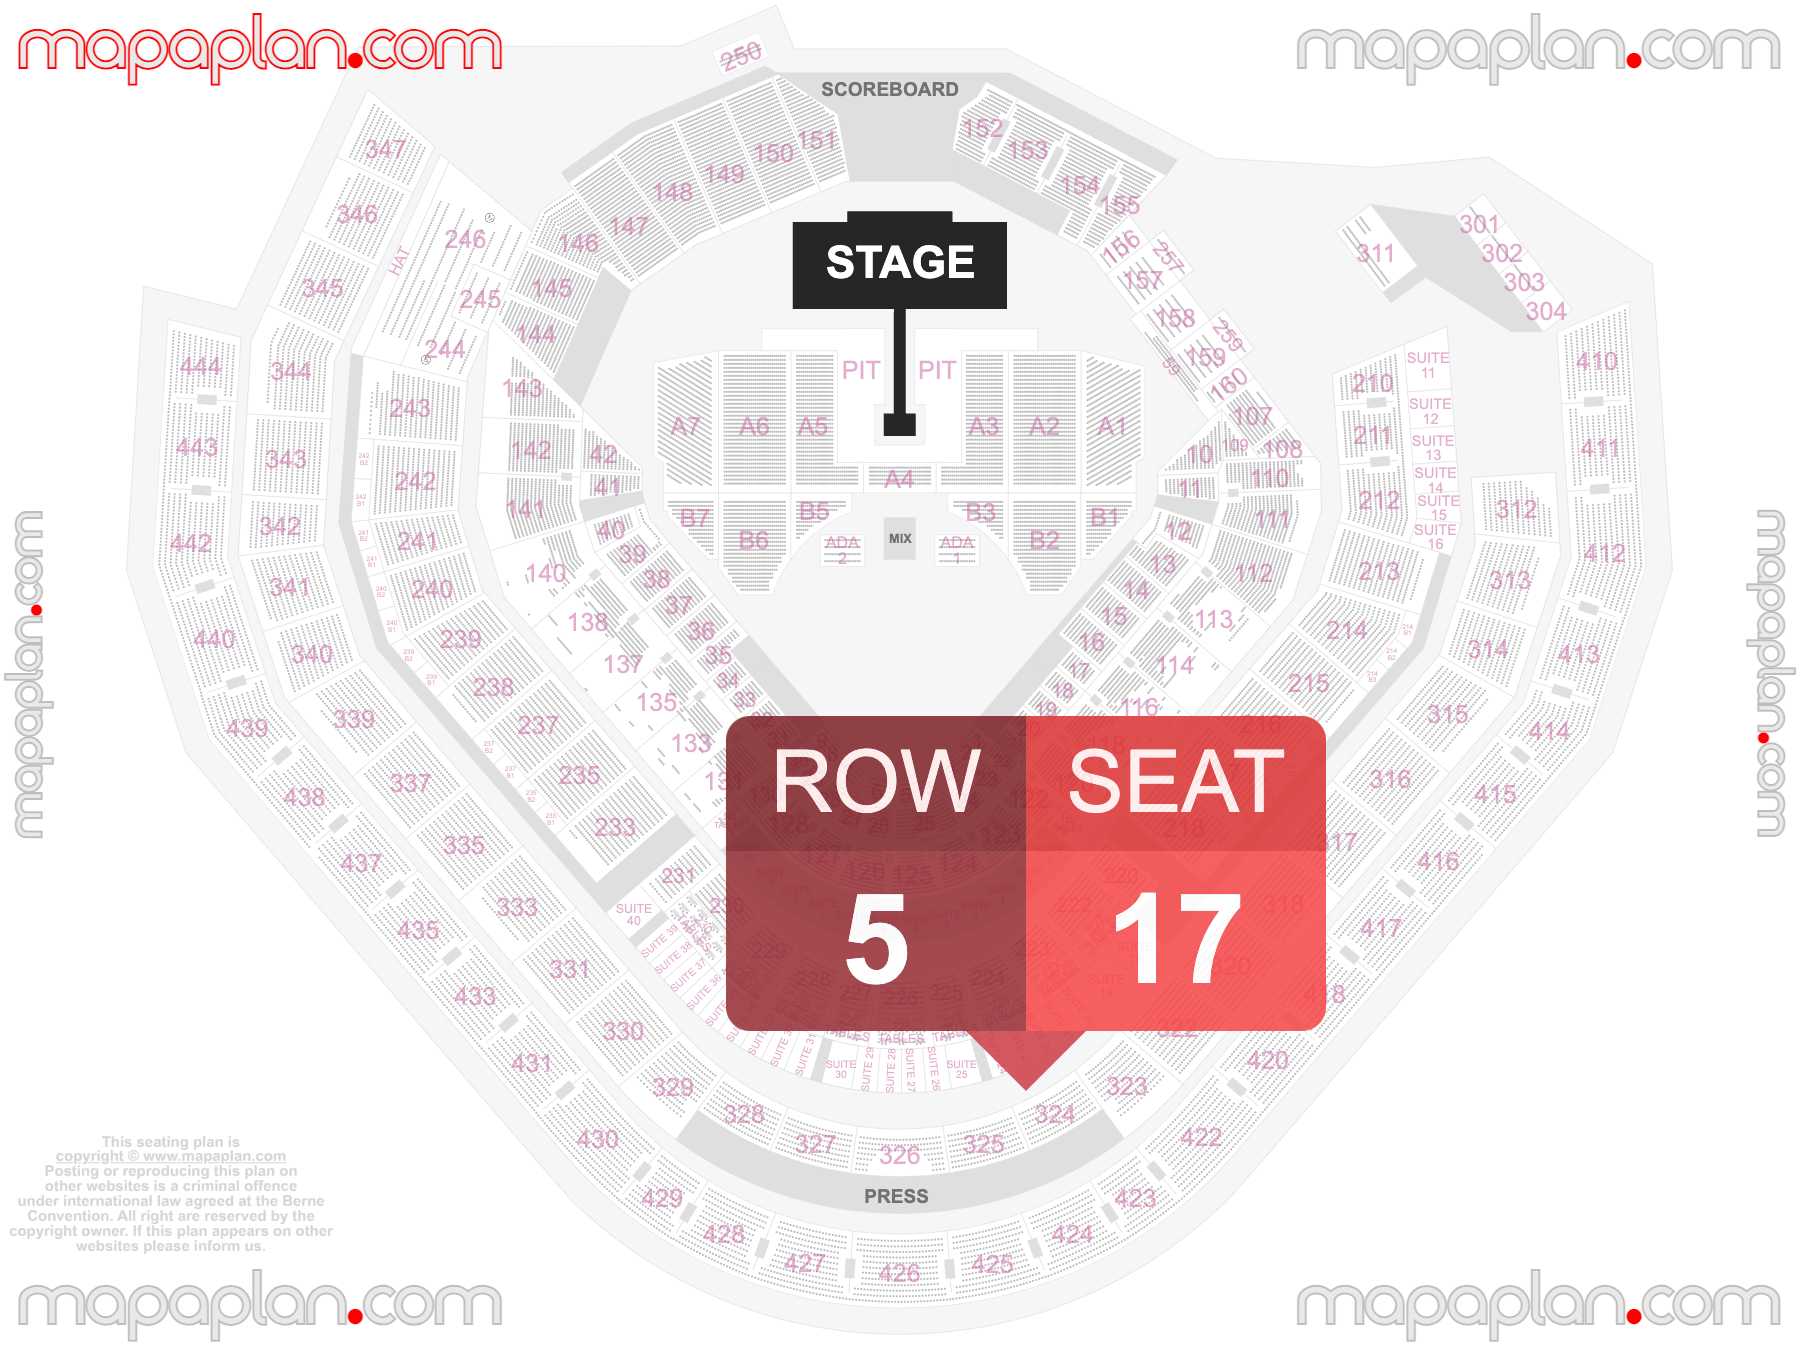 Atlanta Truist Park seating chart Concert detailed seat numbers and row numbering chart with interactive map plan layout